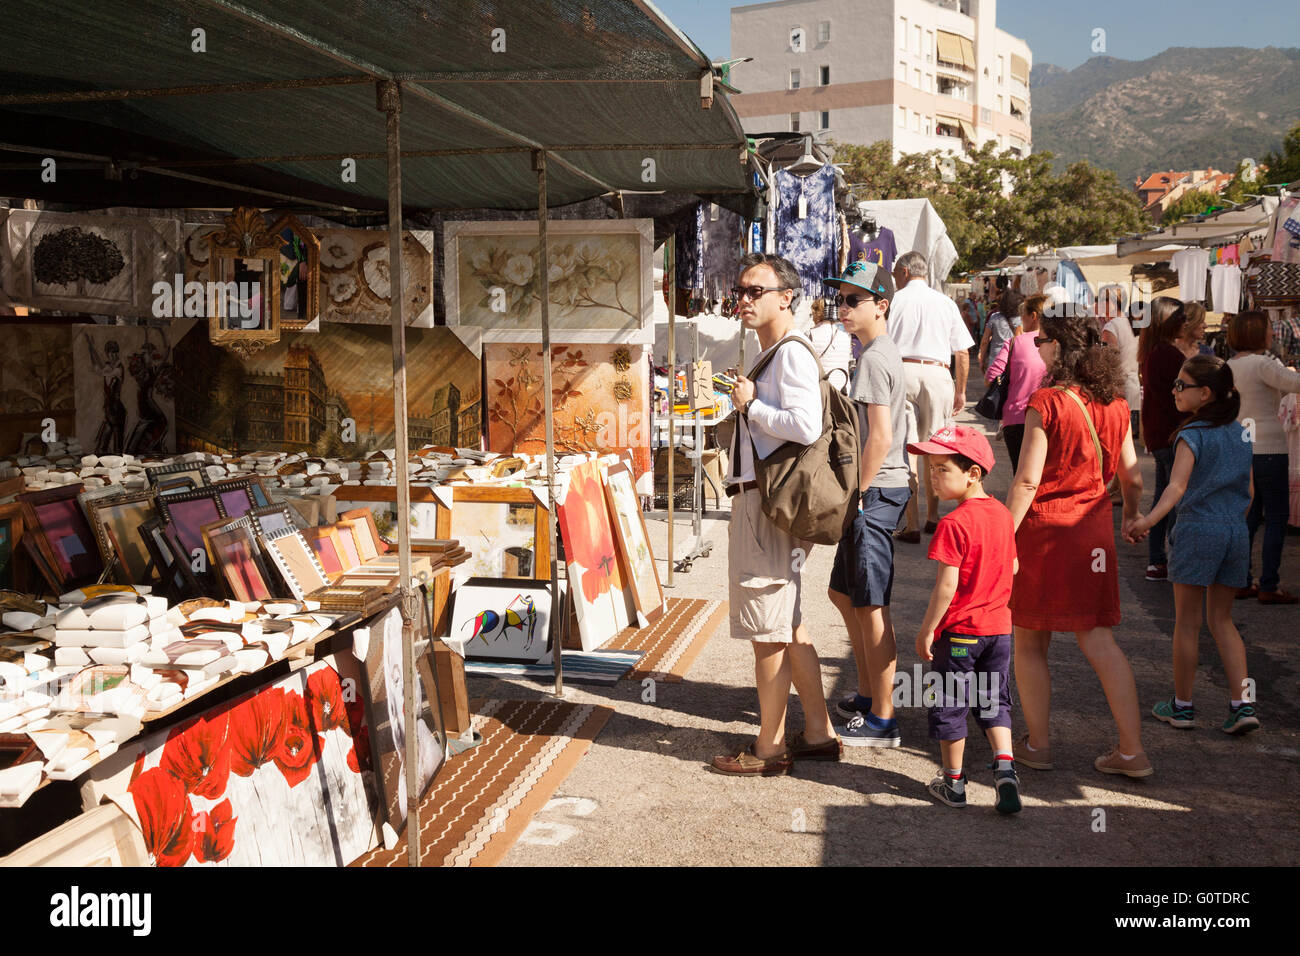 A family with children shopping at a market stall, Marbella market, Andalusia Spain, Europe Stock Photo